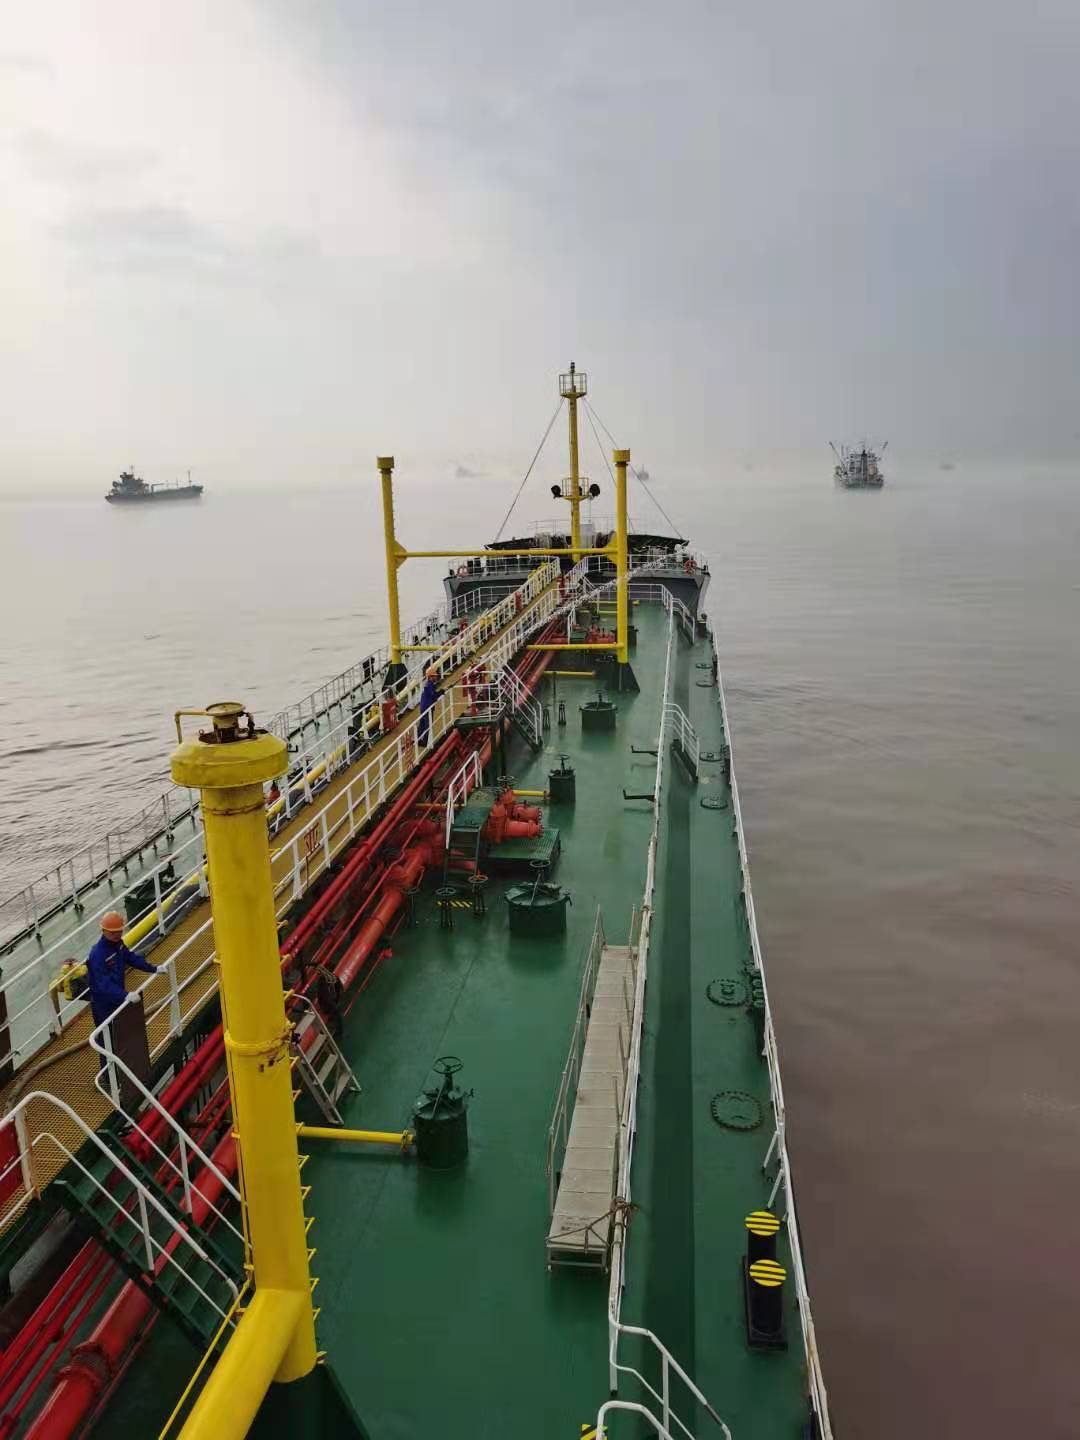 4500 T Product Oil Tanker For Sale